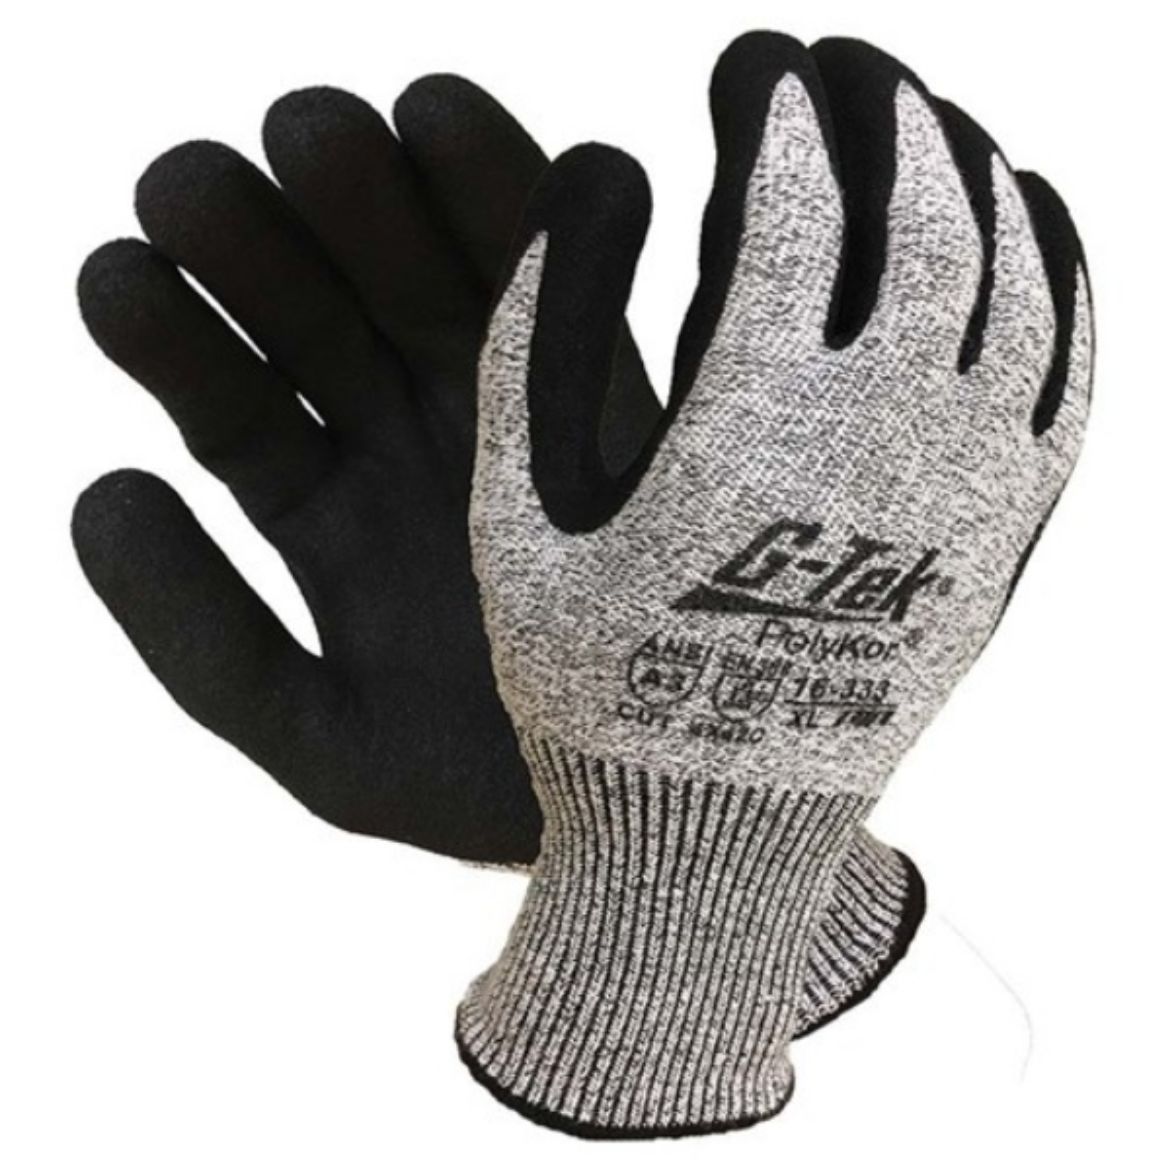 Picture of G-TEK POLYKOR CUT C GLOVES.  MOQ - 12 PAIRS.AVAILABLE IN SIZES 7 TO 11.